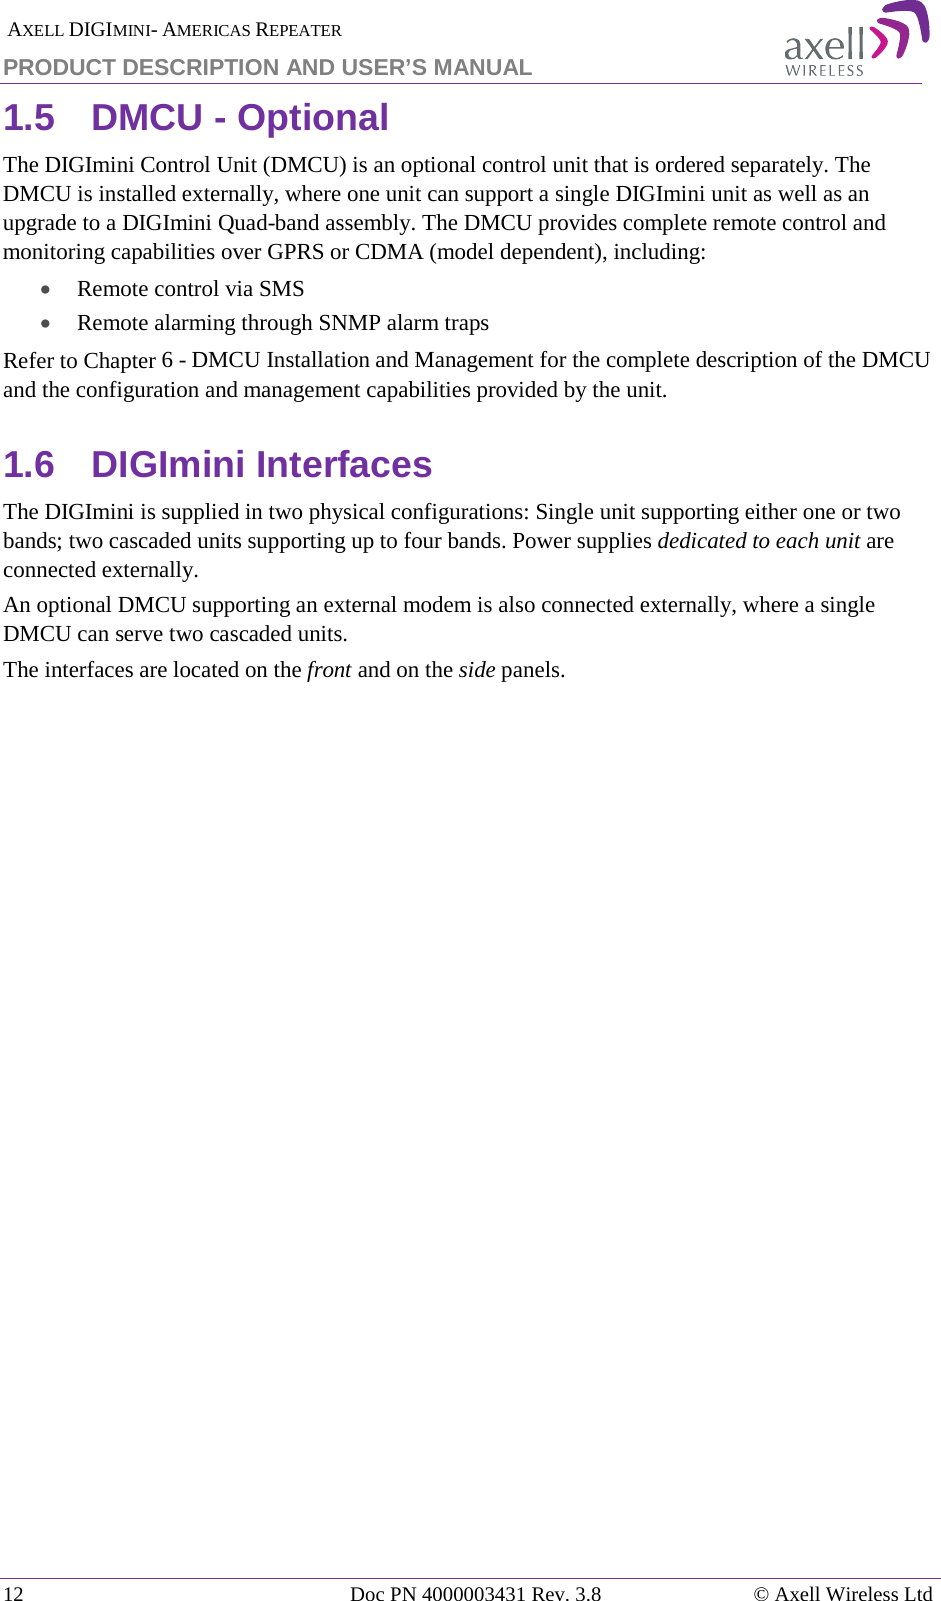  AXELL DIGIMINI- AMERICAS REPEATER PRODUCT DESCRIPTION AND USER’S MANUAL 12   Doc PN 4000003431 Rev. 3.8 © Axell Wireless Ltd 1.5  DMCU - Optional The DIGImini Control Unit (DMCU) is an optional control unit that is ordered separately. The DMCU is installed externally, where one unit can support a single DIGImini unit as well as an upgrade to a DIGImini Quad-band assembly. The DMCU provides complete remote control and monitoring capabilities over GPRS or CDMA (model dependent), including:  • Remote control via SMS • Remote alarming through SNMP alarm traps Refer to Chapter  6 - DMCU Installation and Management for the complete description of the DMCU and the configuration and management capabilities provided by the unit. 1.6  DIGImini Interfaces The DIGImini is supplied in two physical configurations: Single unit supporting either one or two bands; two cascaded units supporting up to four bands. Power supplies dedicated to each unit are connected externally.  An optional DMCU supporting an external modem is also connected externally, where a single DMCU can serve two cascaded units.  The interfaces are located on the front and on the side panels.    